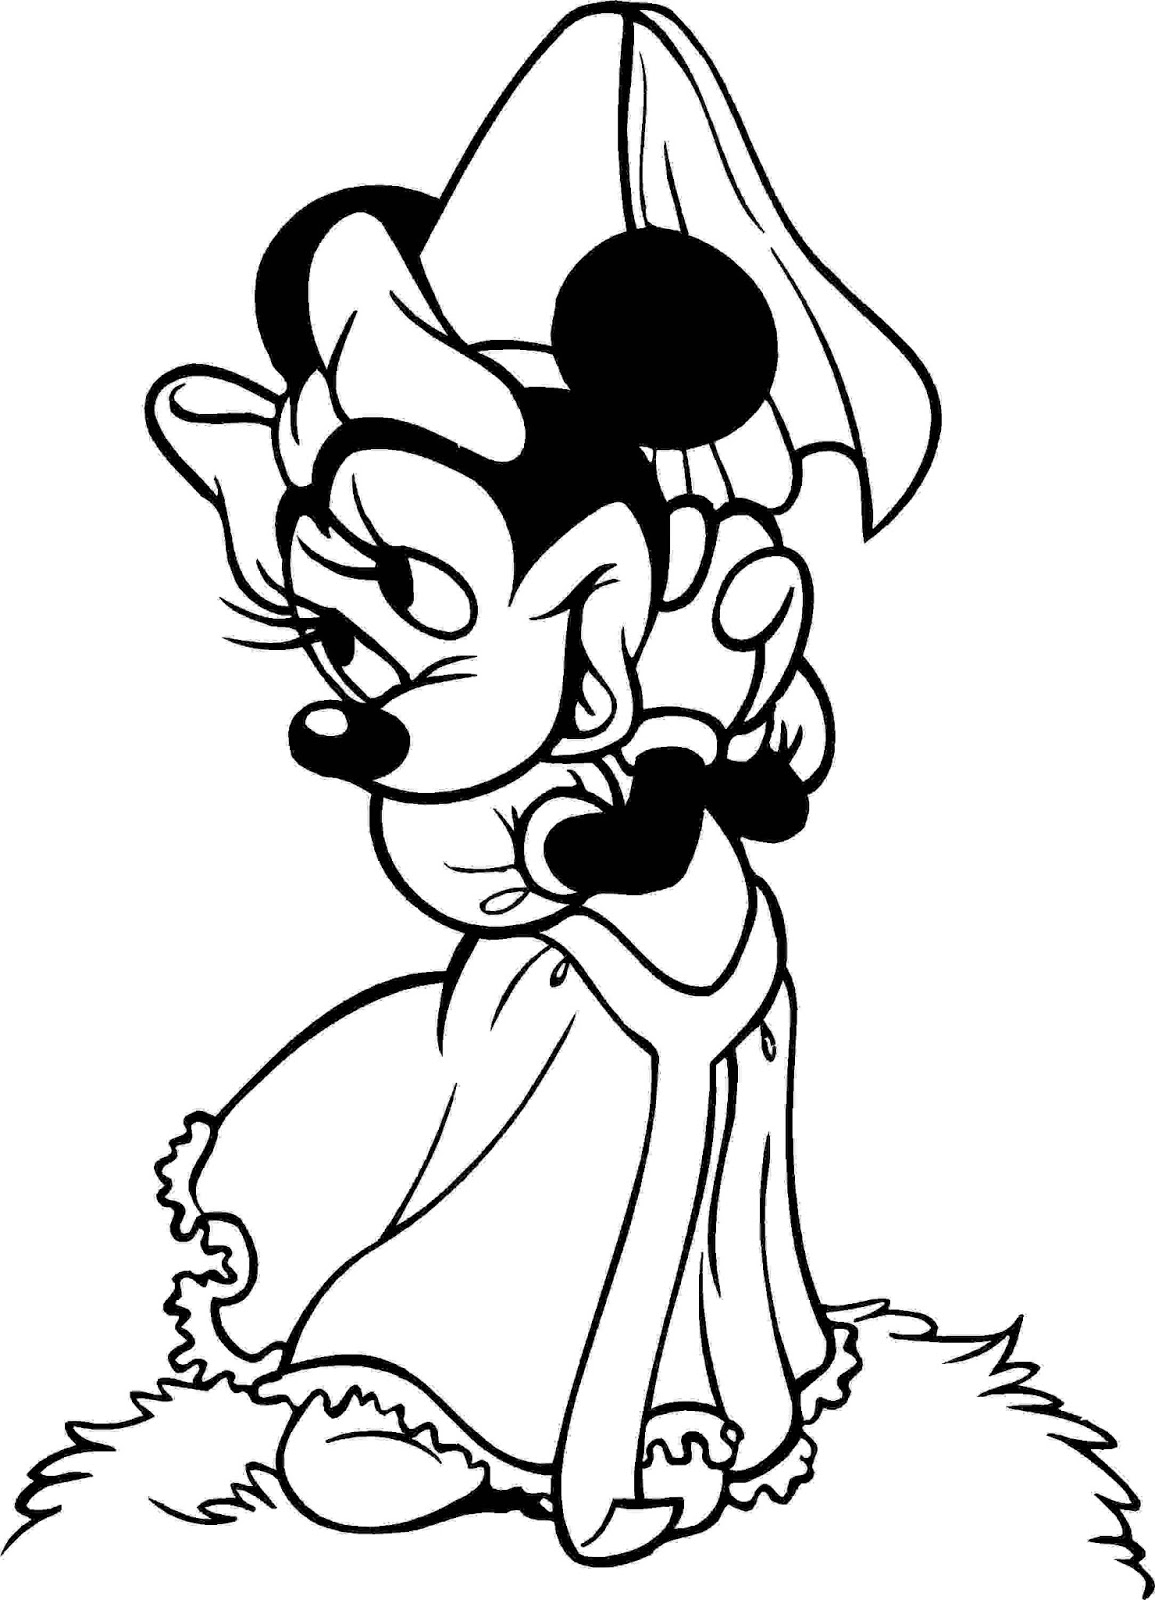 Download Free Disney Minnie Mouse Coloring Pages